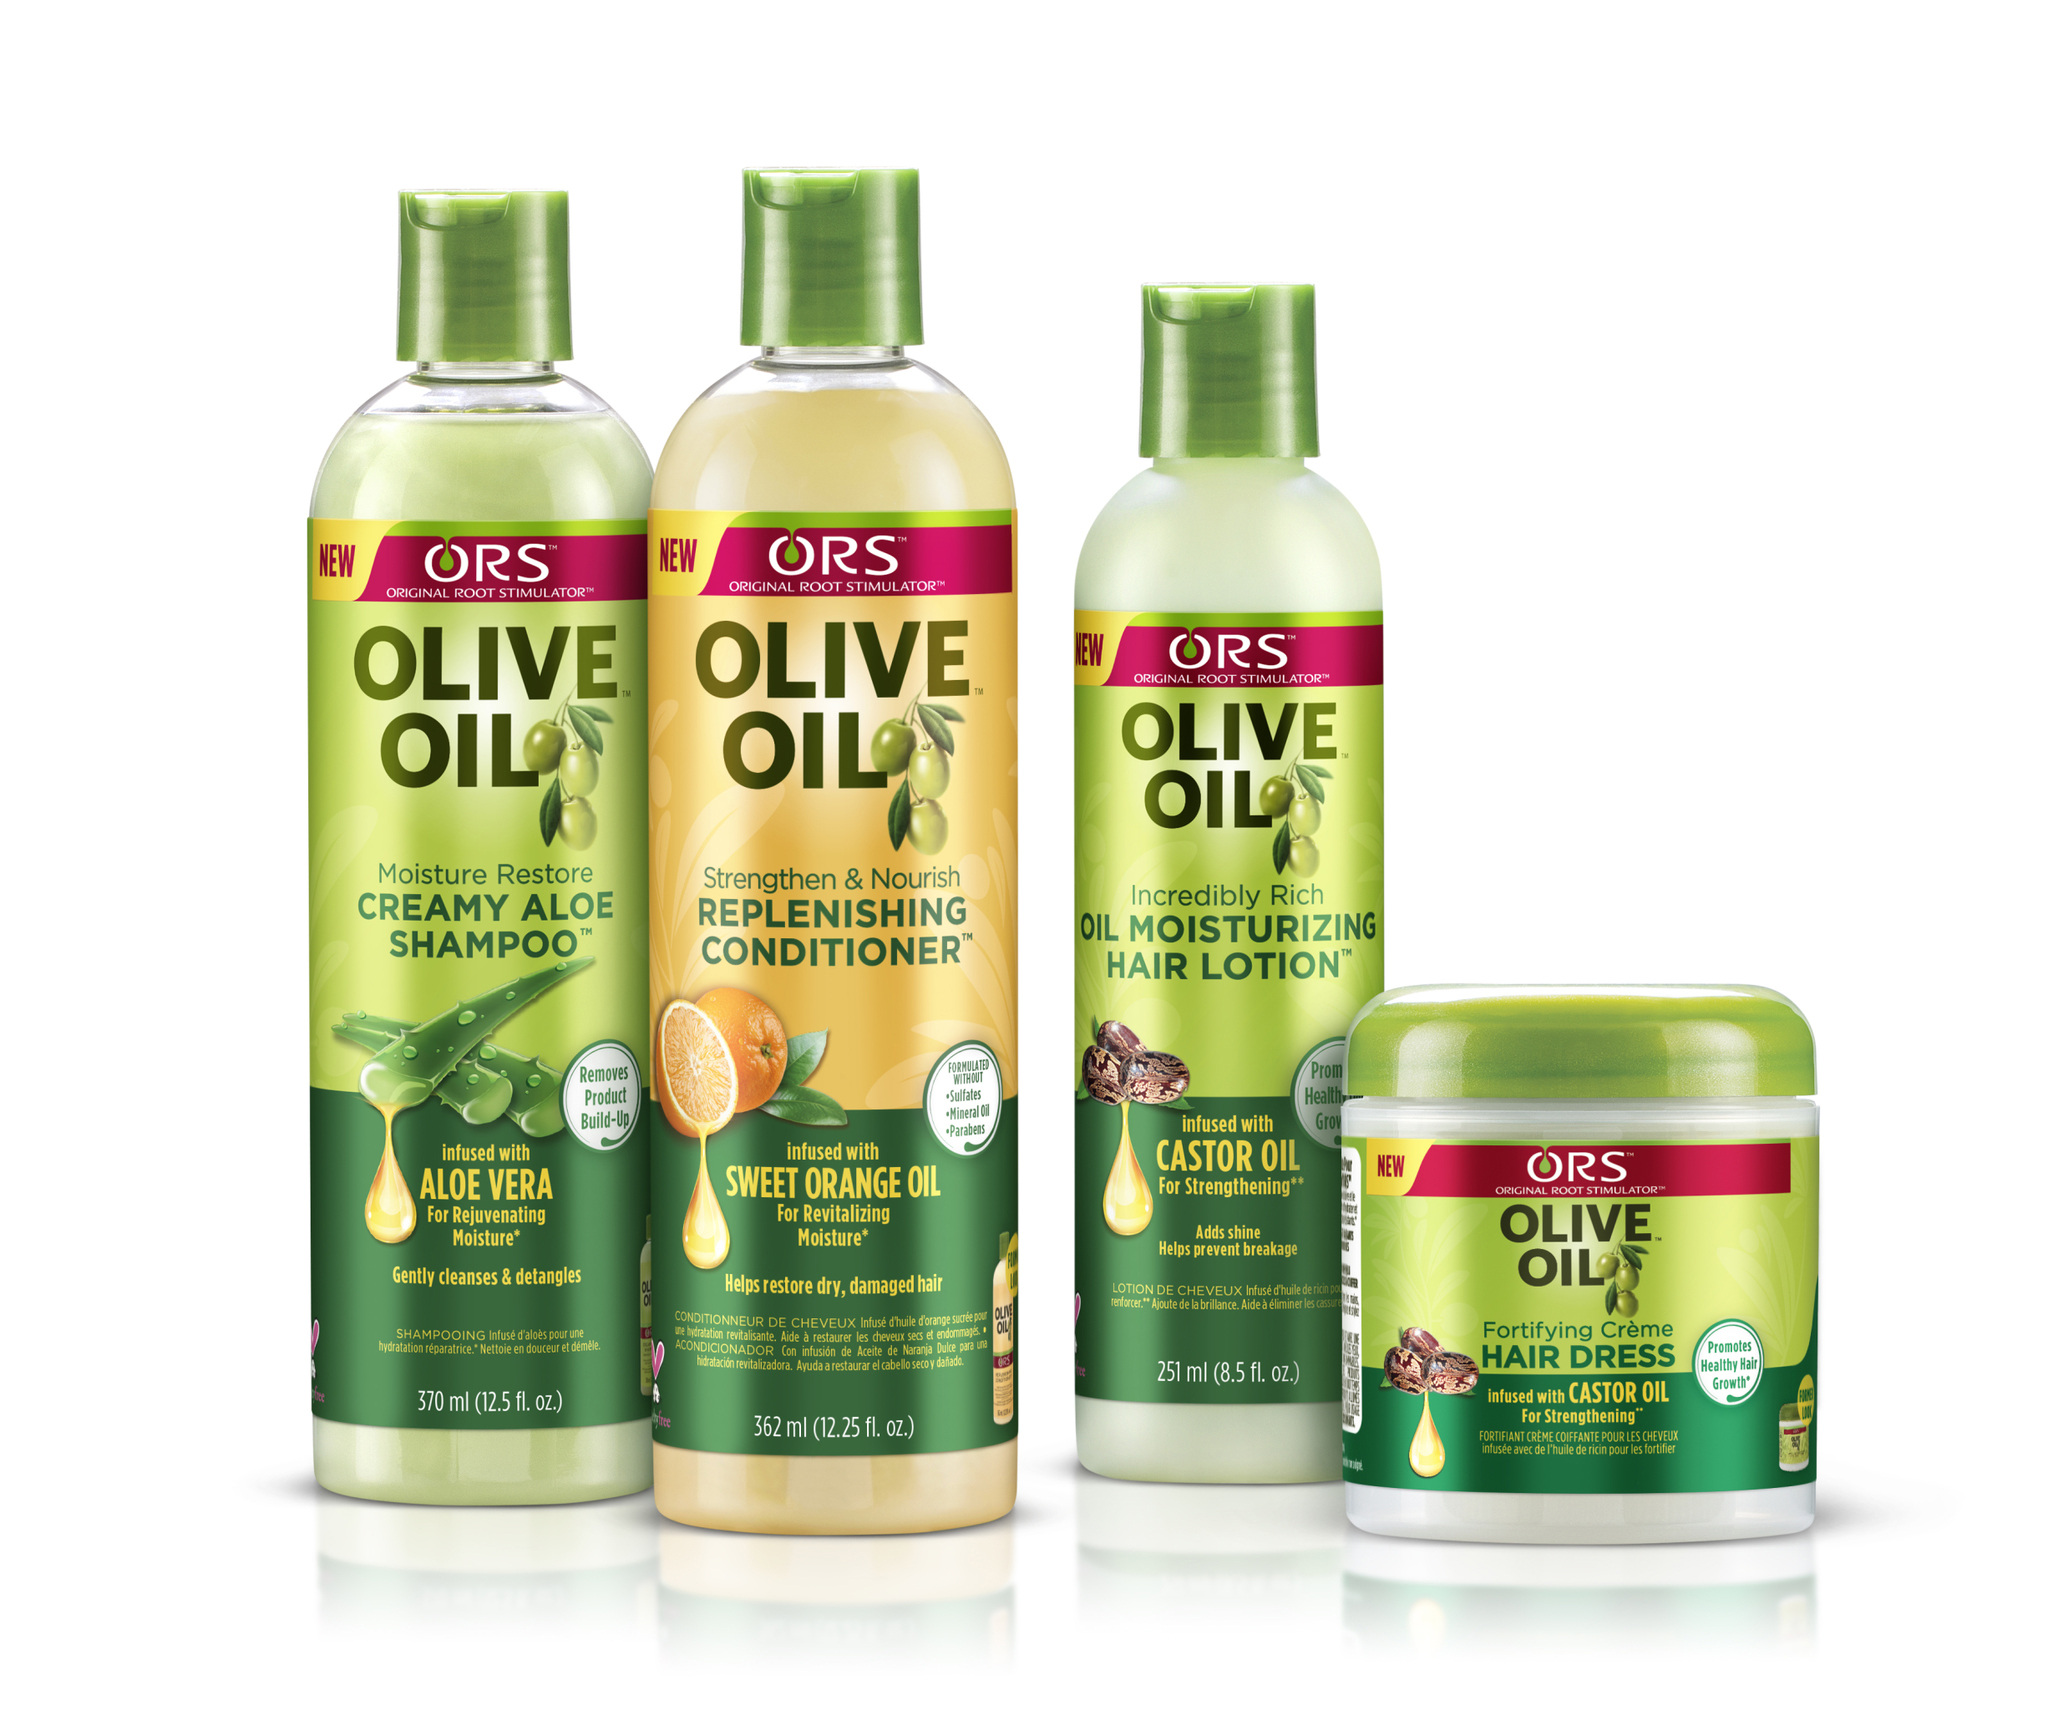 haircare expert ors™ updates its iconic olive oil collection